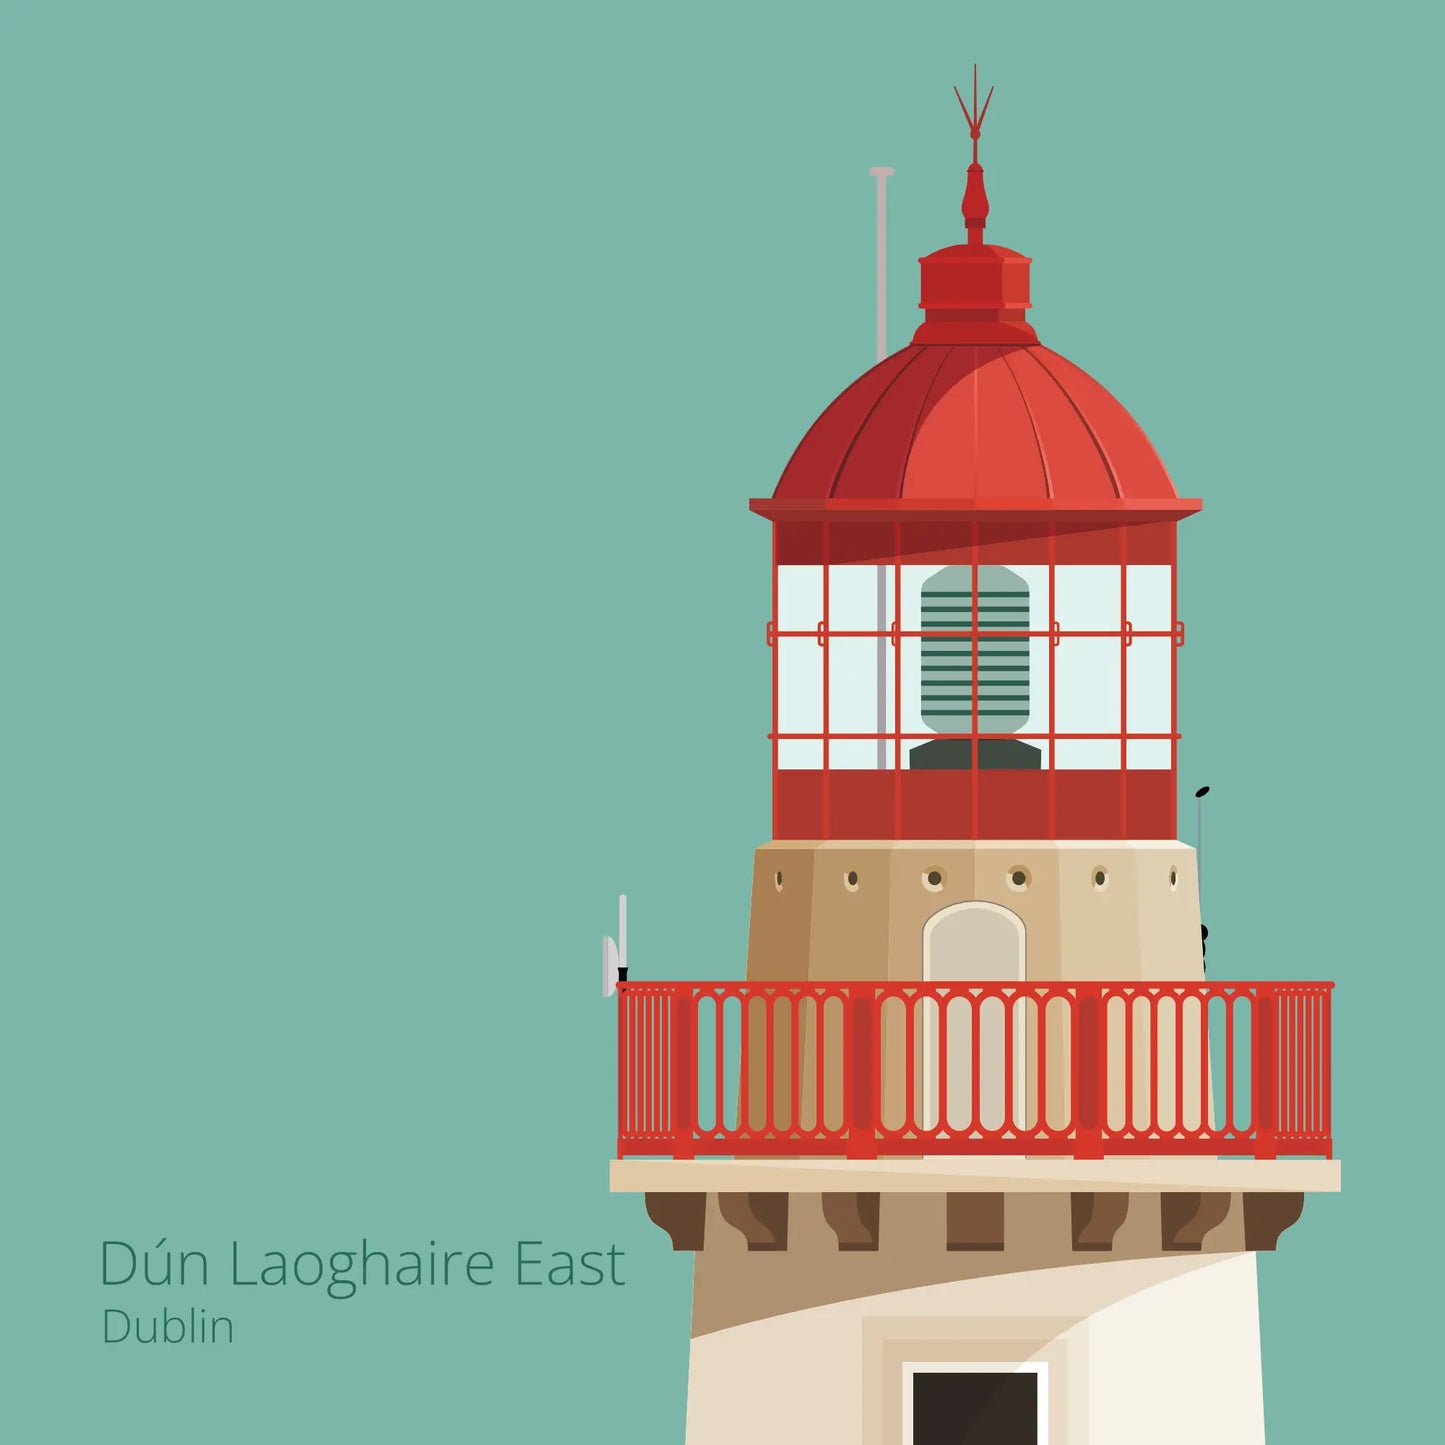 Illustration of Dún Laoghaire East lighthouse on an ocean green background